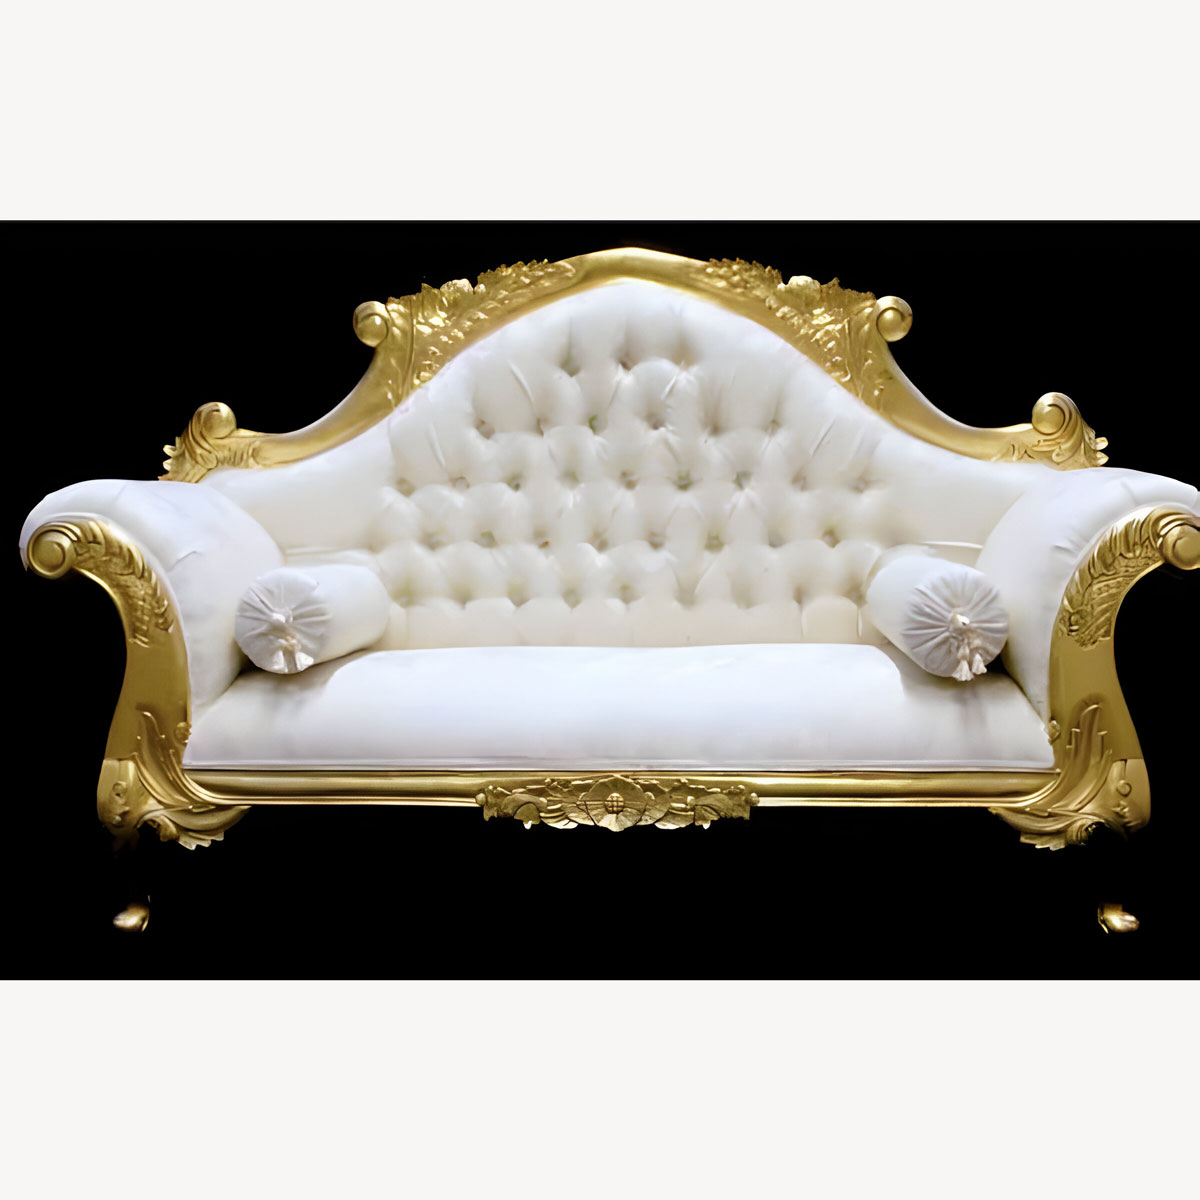 Charles Louis Cuddler Love Seat Chaise Sofa In Gold Leaf Frame With Ivory Cream Fabric 1 - Hampshire Barn Interiors - Charles Louis Cuddler Love Seat Chaise Sofa In Gold Leaf Frame With Ivory Cream Fabric -